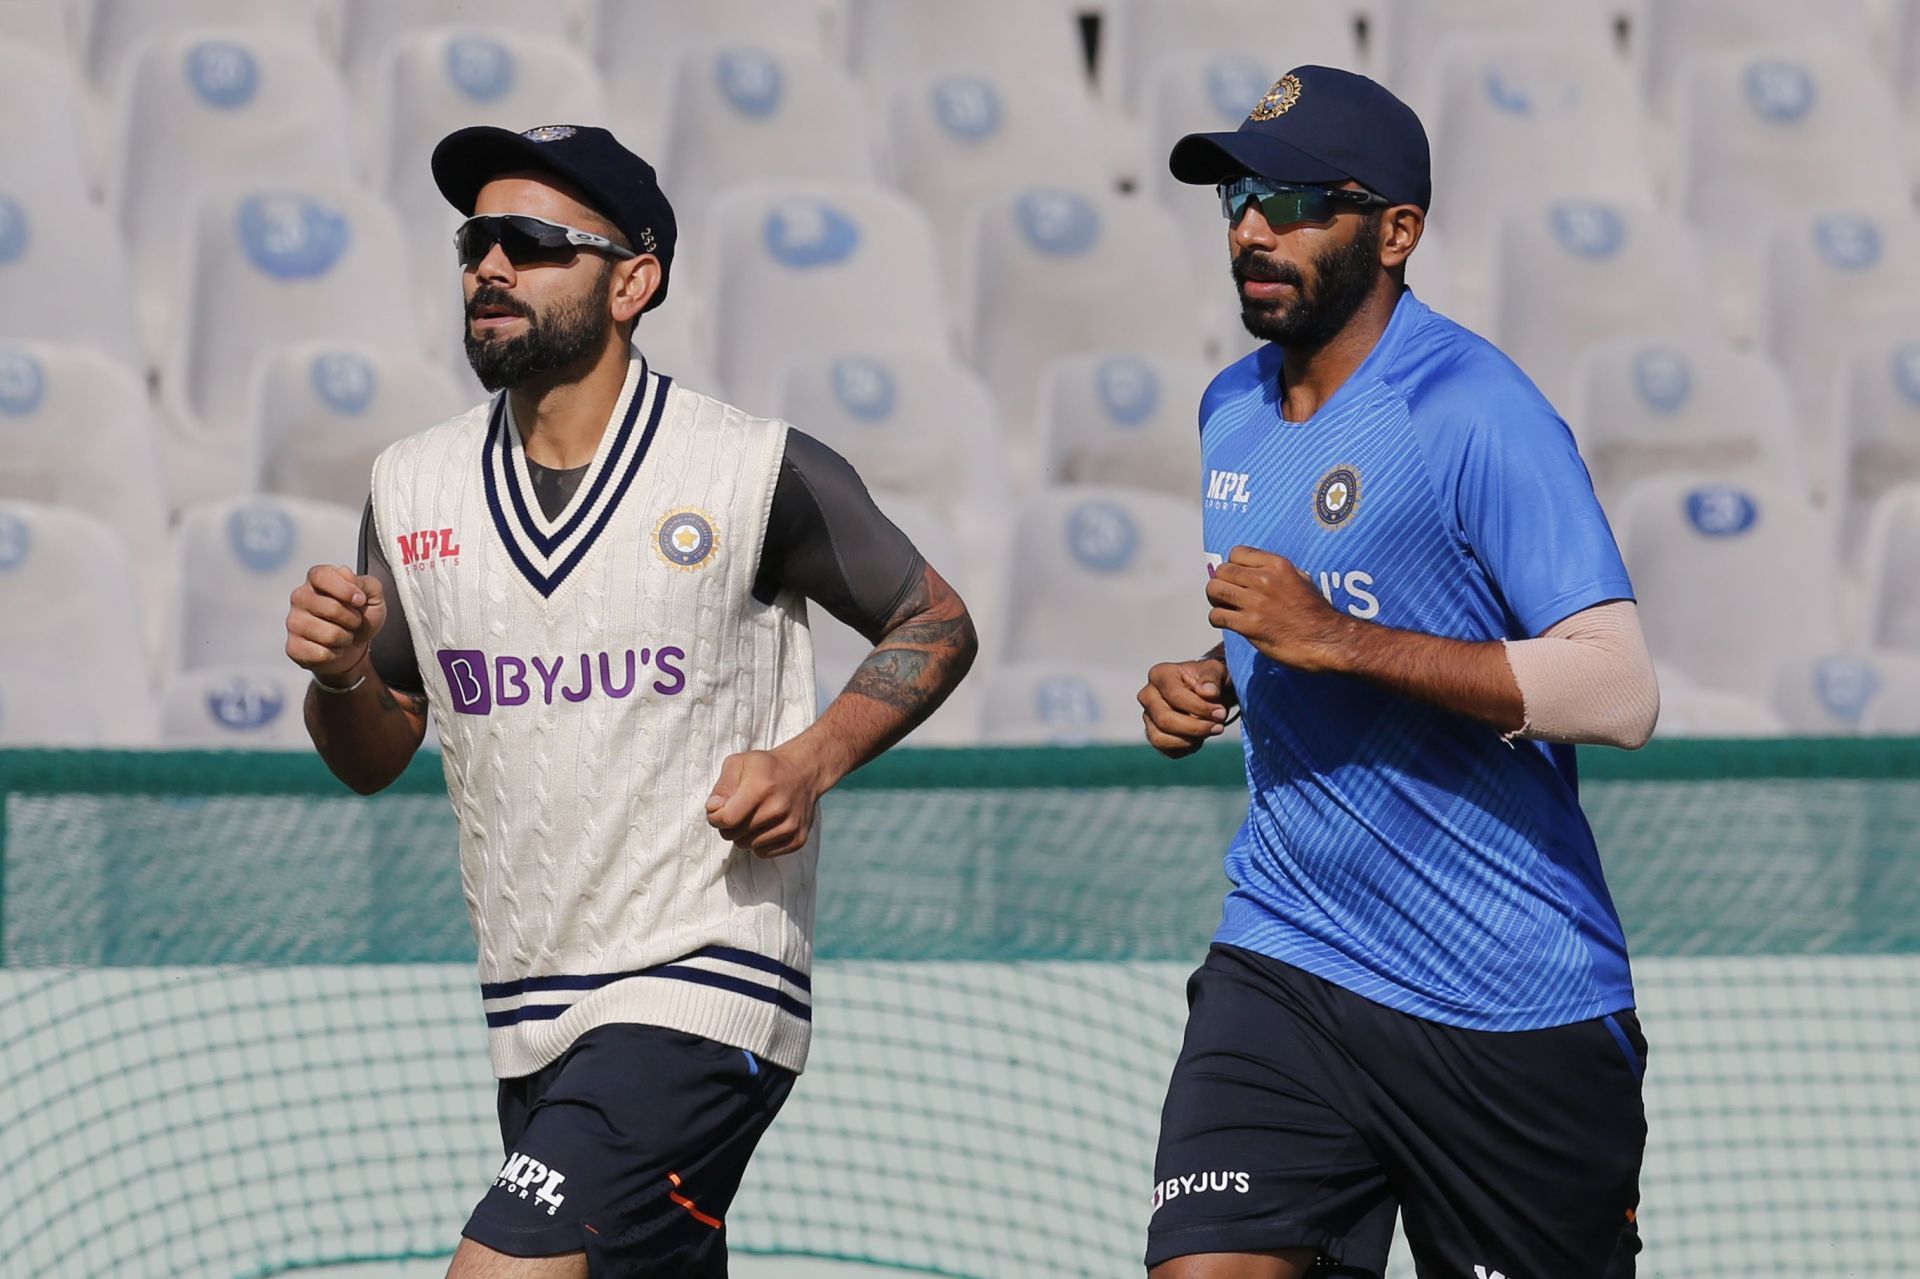 Virat Kohli and Test vice-captain Jasprit Bumrah (R) during a training session in Mohali [Credits: BCCI]